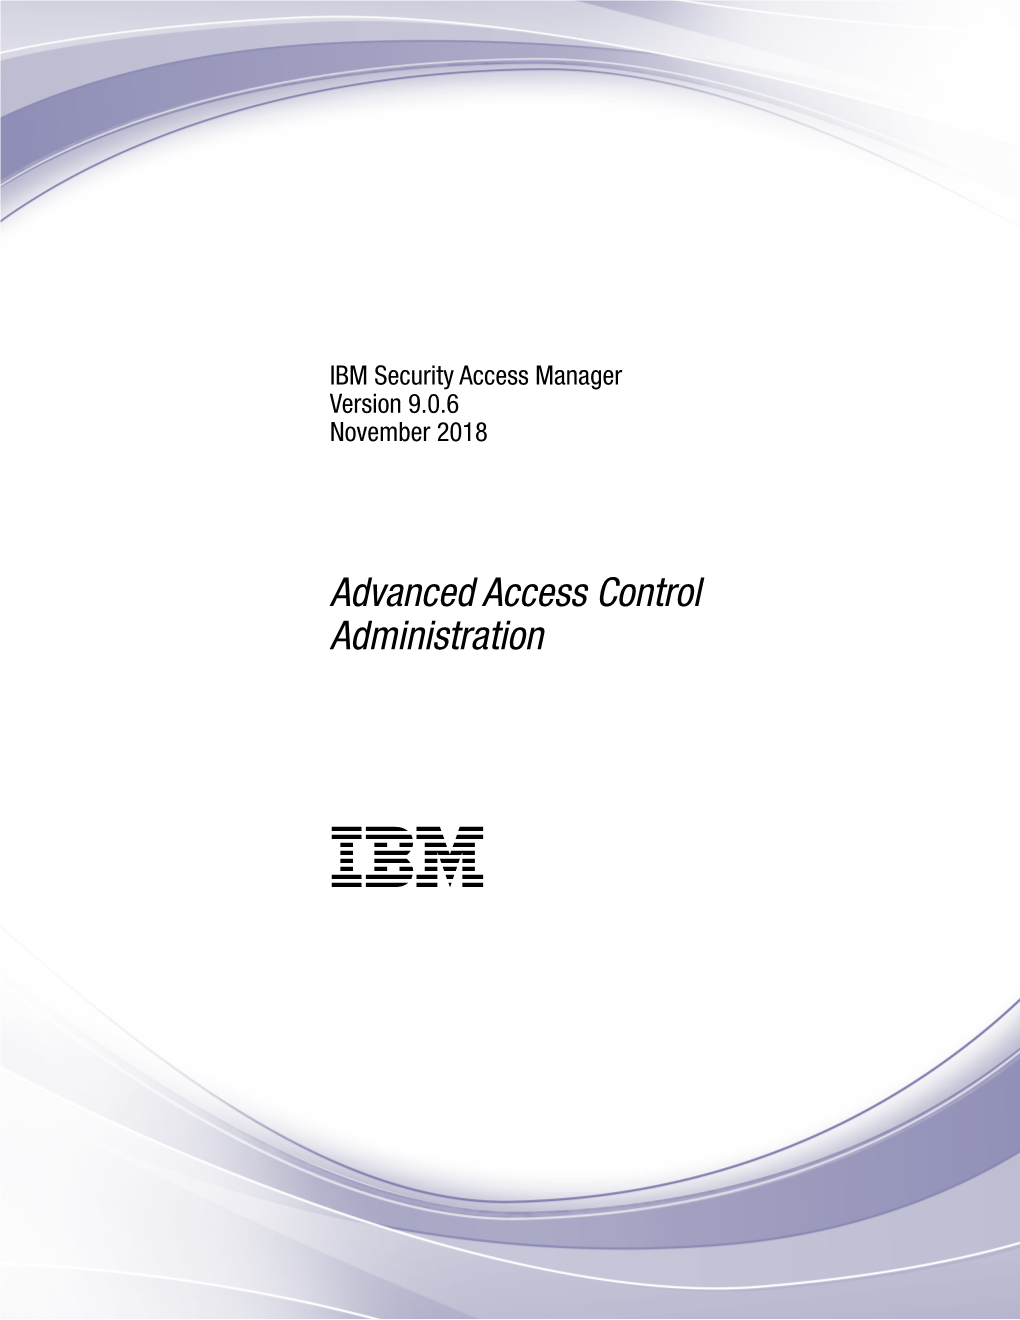 IBM Security Access Manager Version 9.0.6 November 2018: Advanced Access Control Administration Contents